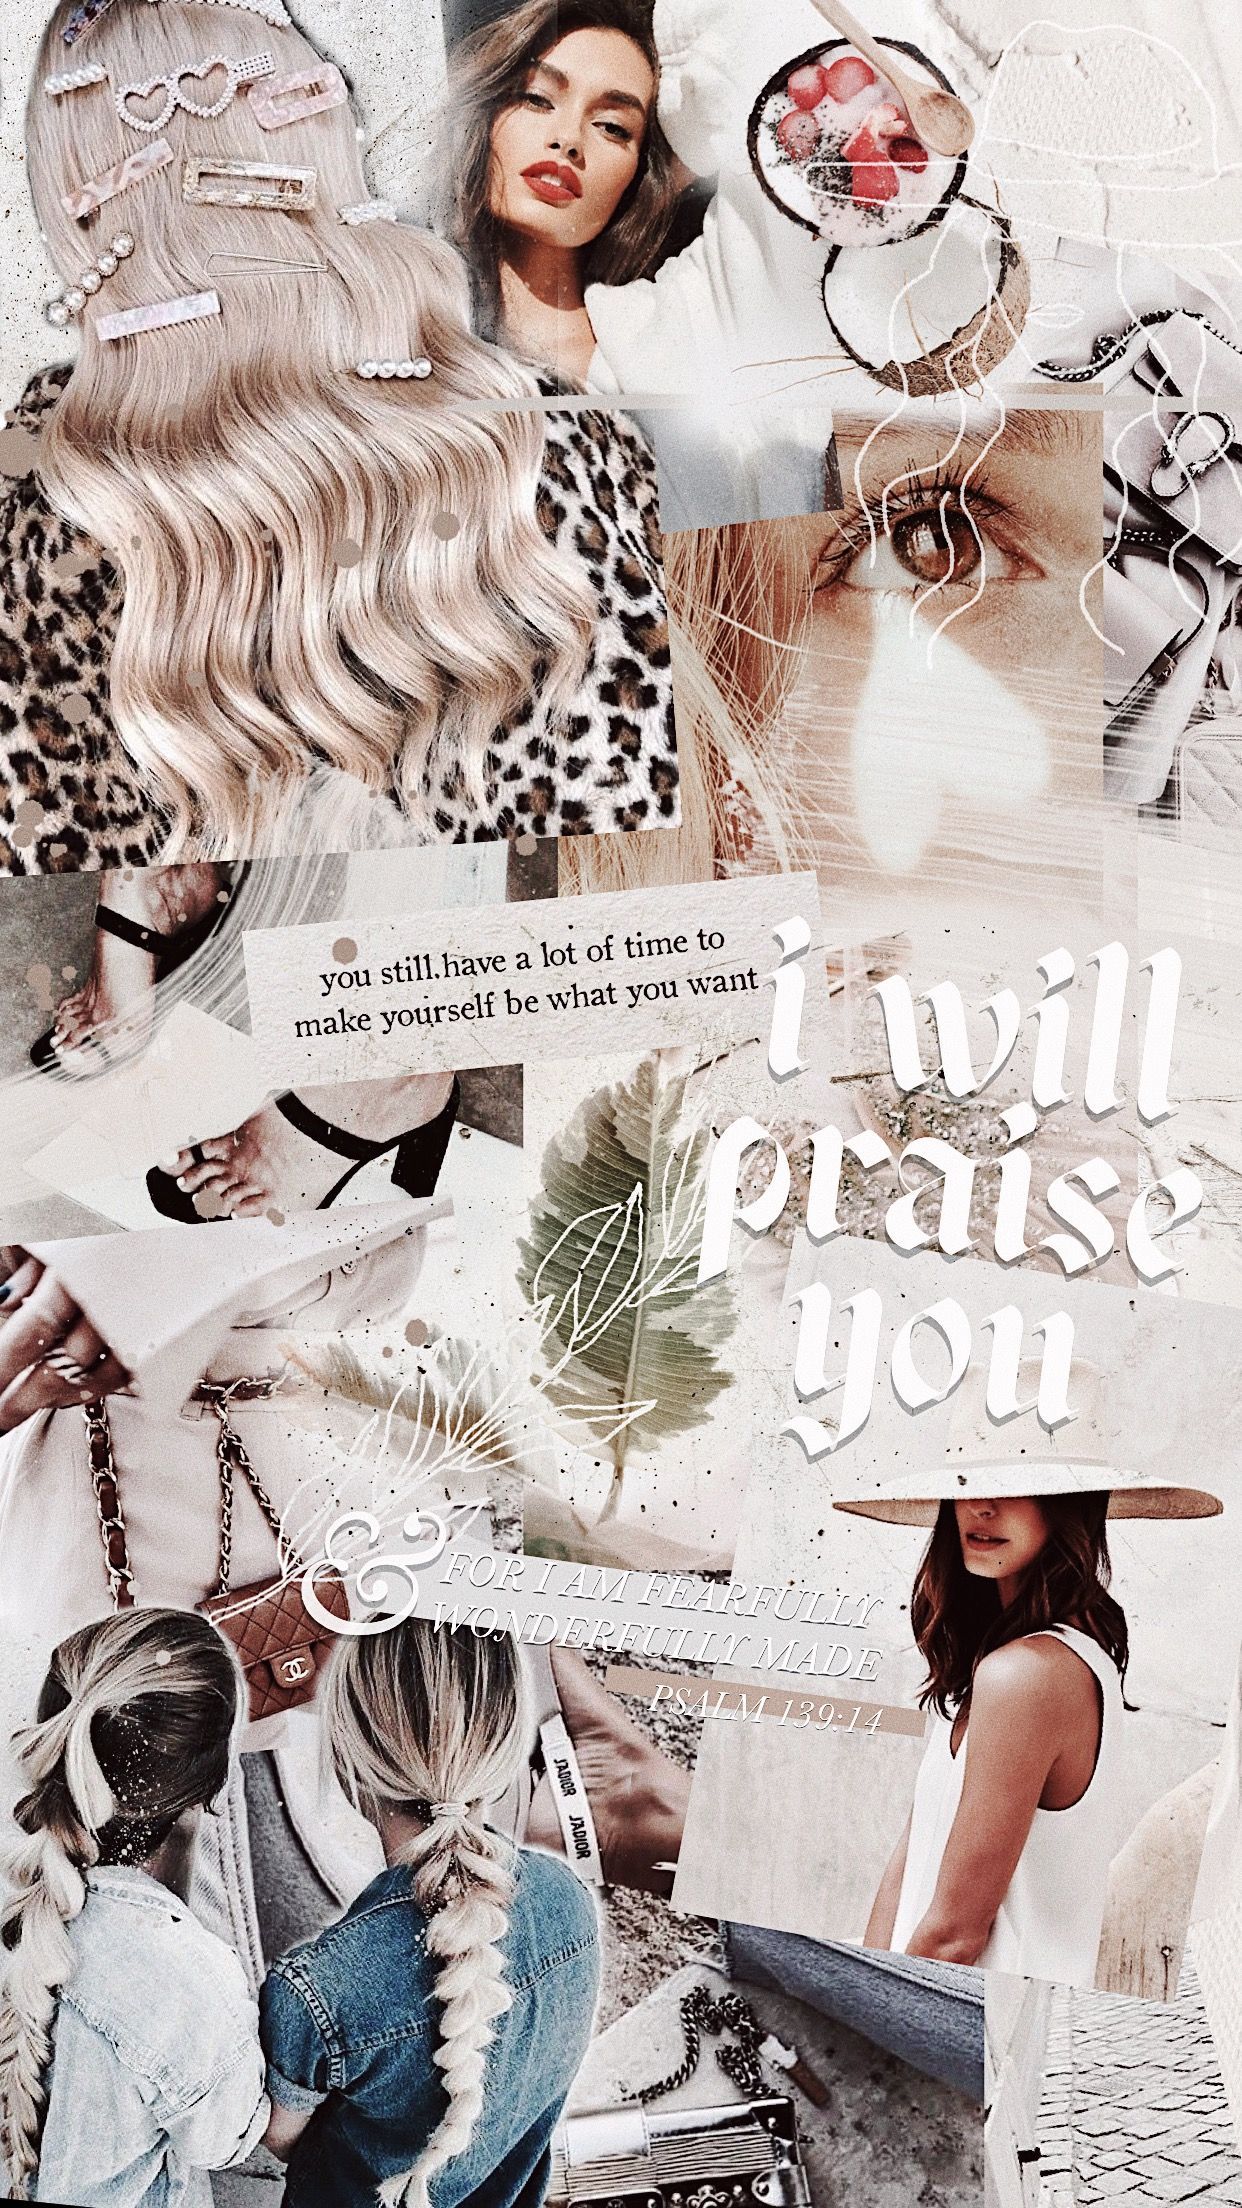 21 Aesthetic Collage Wallpaper Christian Aesthetic collage